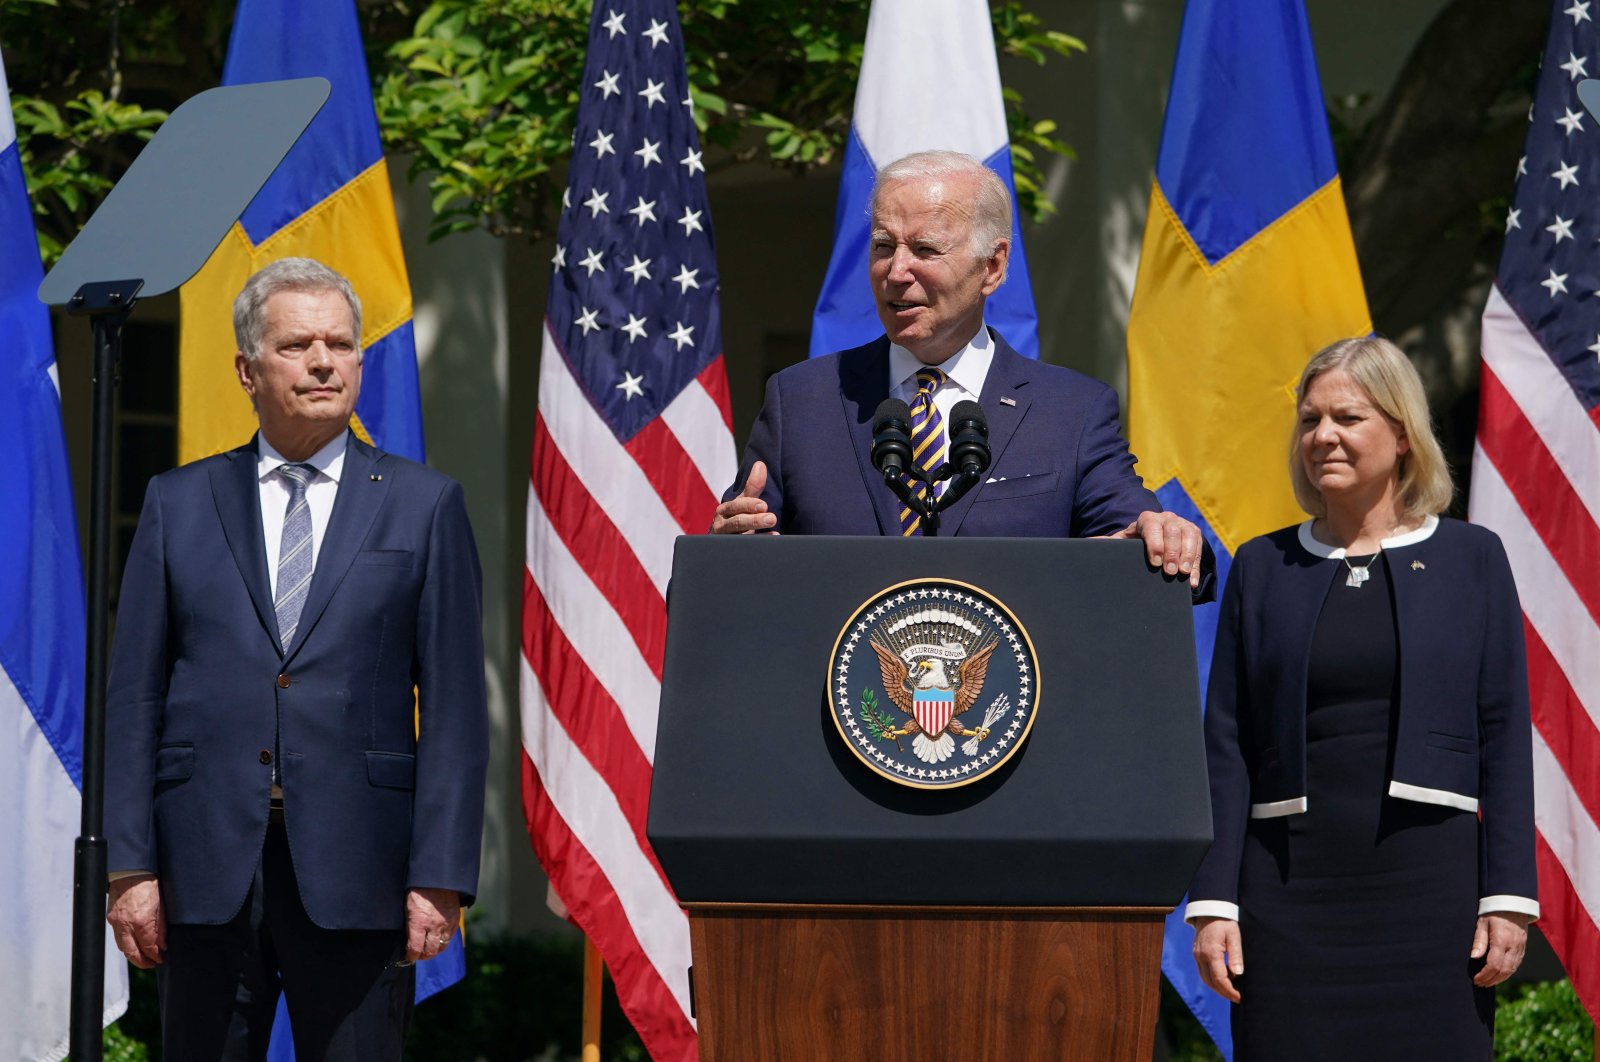 U.S. President Joe Biden (C), flanked by Sweden’s Prime Minister Magdalena Andersson (R) and Finland’s President Sauli Niinistِ, speaks in the Rose Garden following a meeting at the White House in Washington, D.C., May 19, 2022 (AFP Photo)